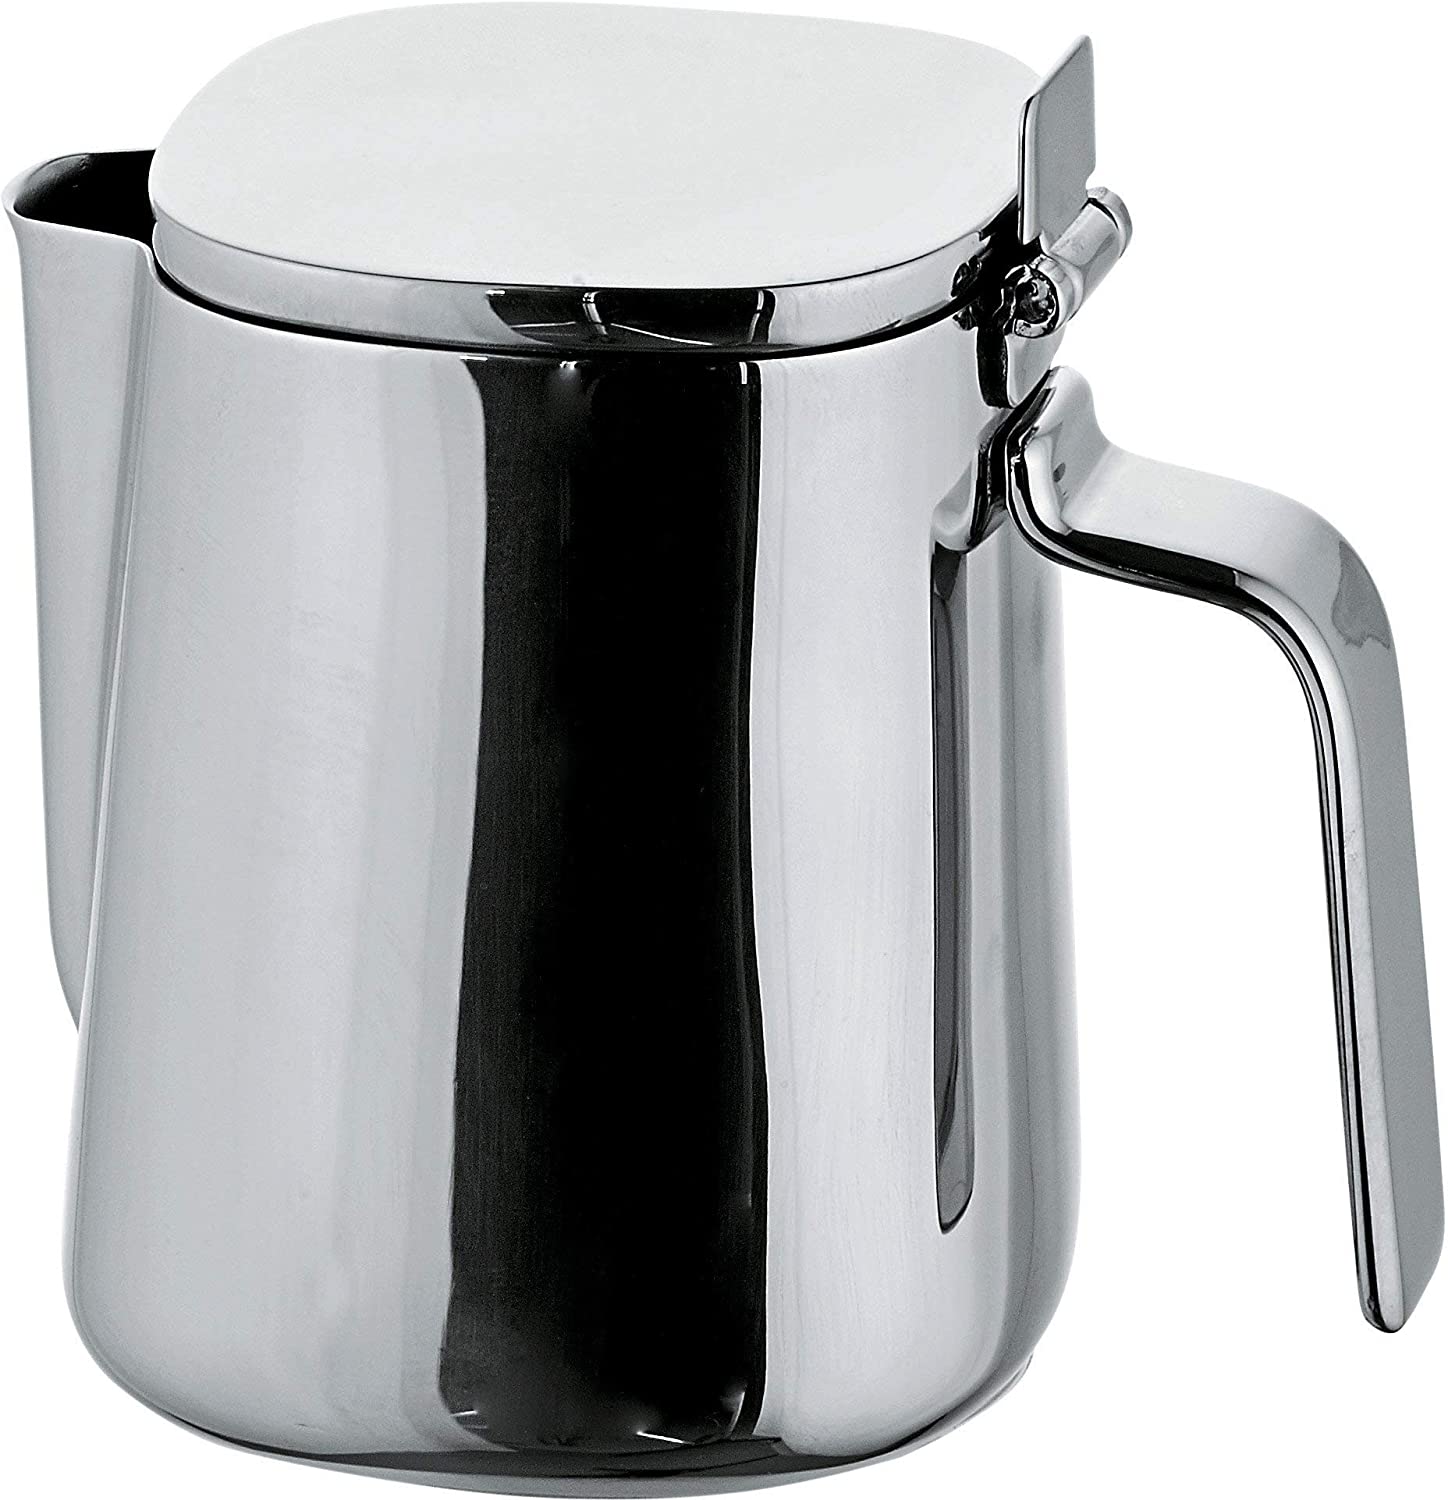 A di Alessi Creamer, Stainless Steel, (A411)